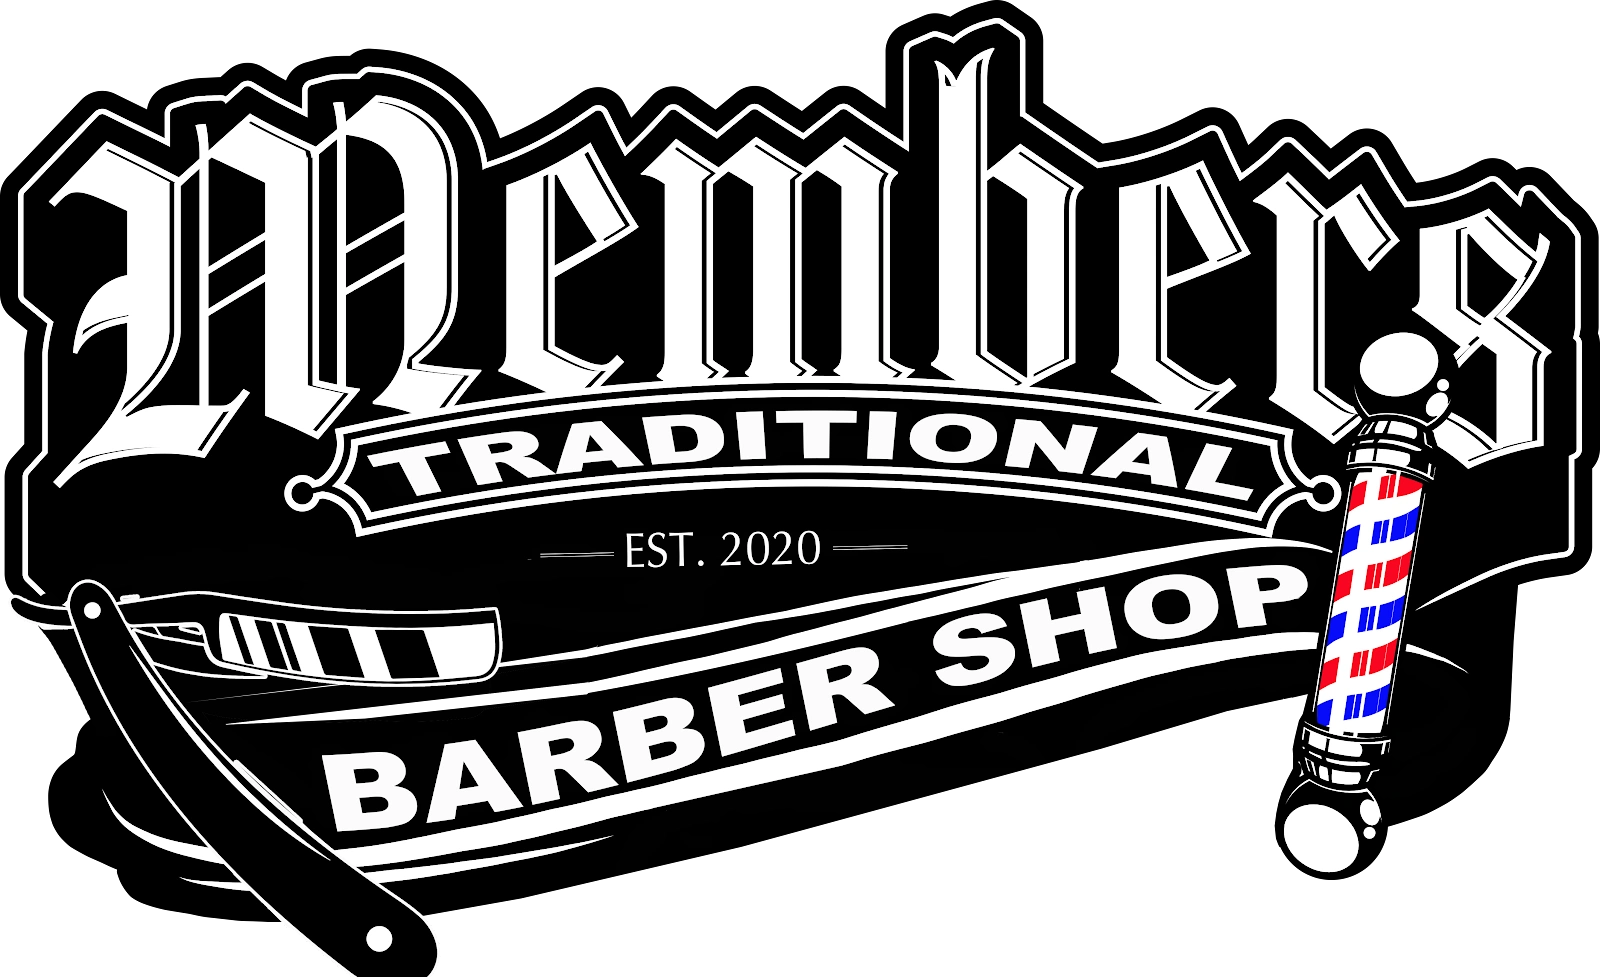 Logo for Members Traditional Barbershop located in mission hills California.